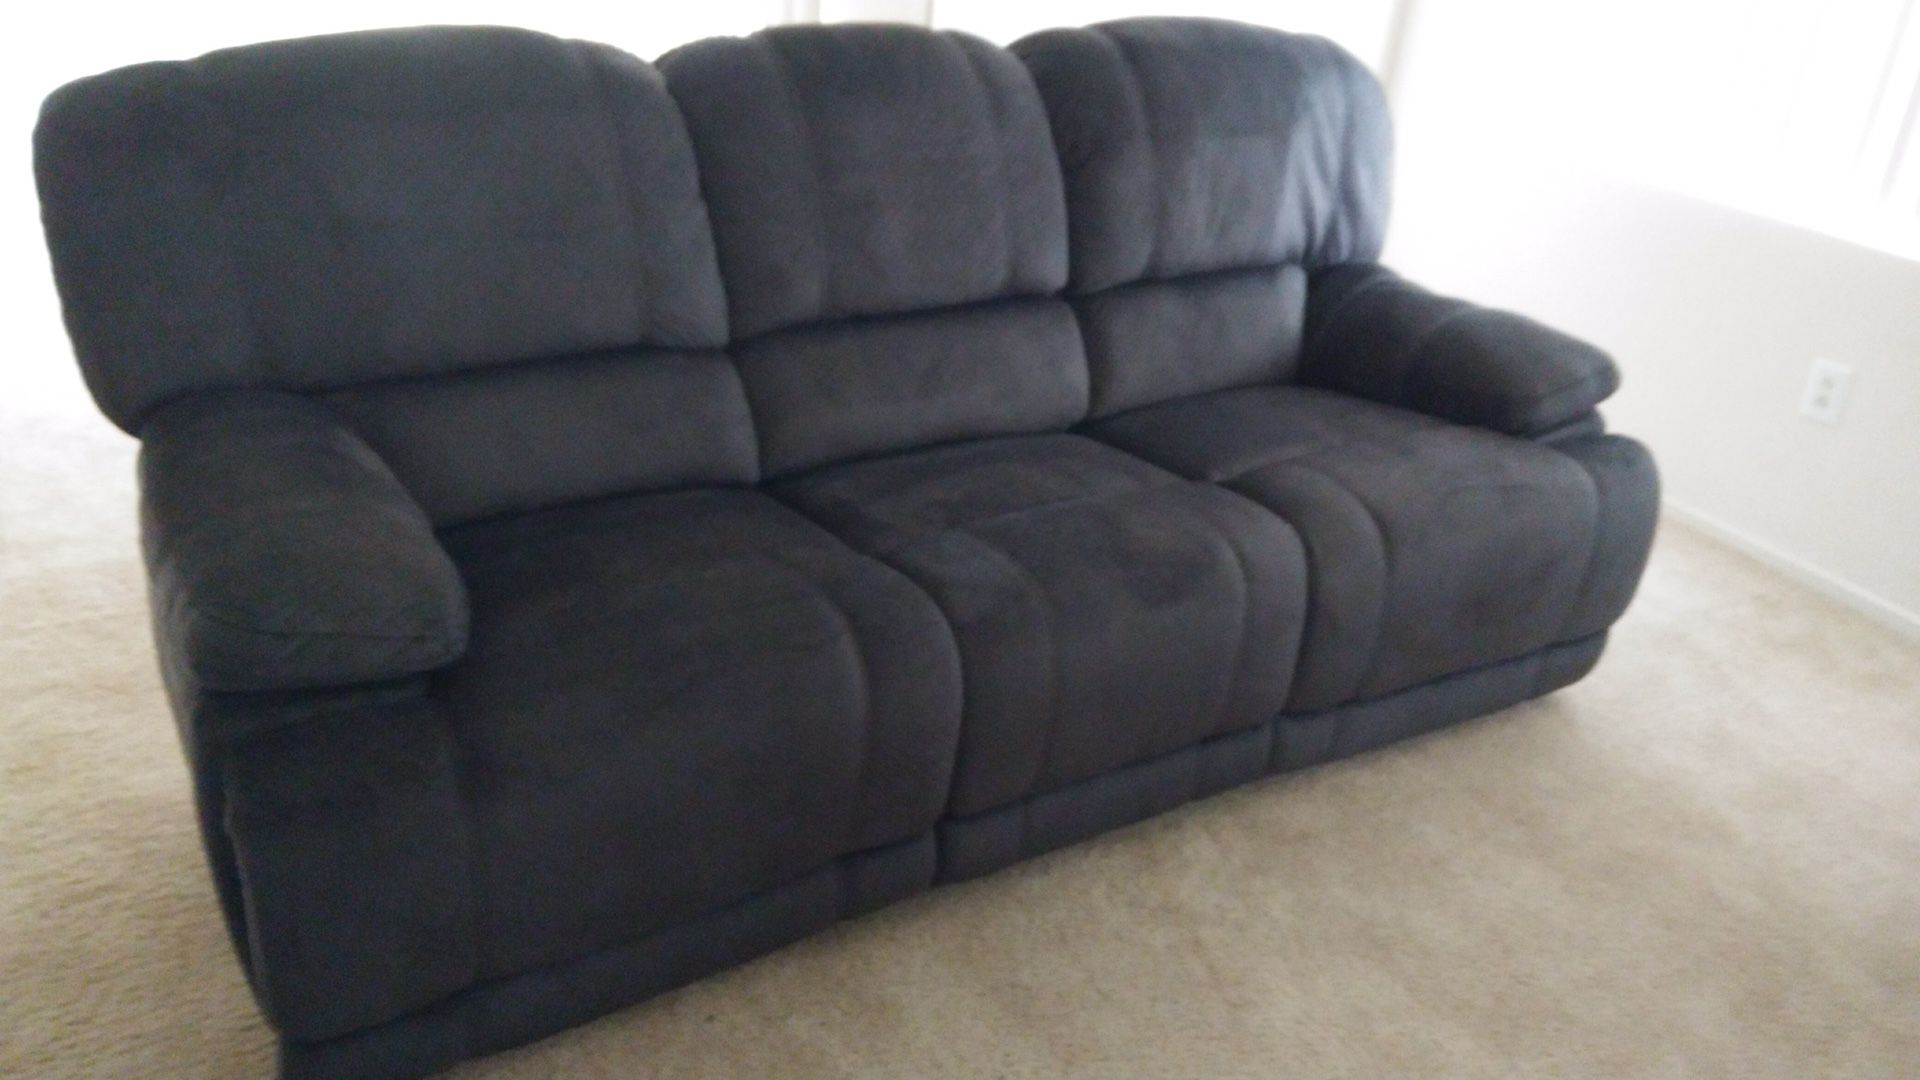 Couch with 2 built in recliners. Barely used